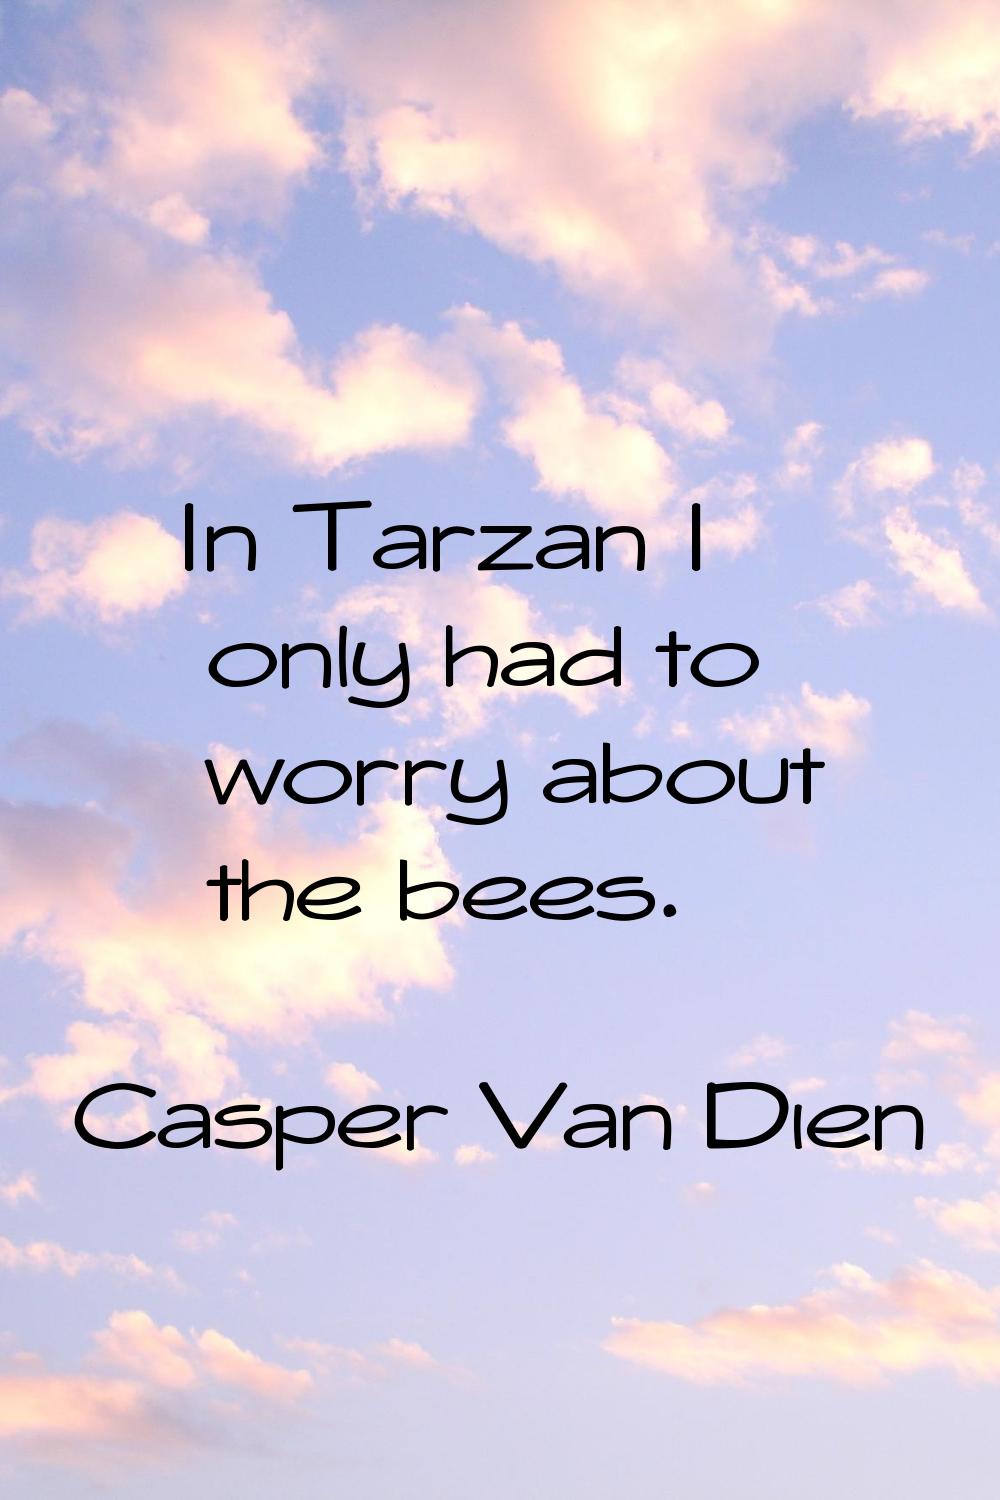 In Tarzan I only had to worry about the bees.